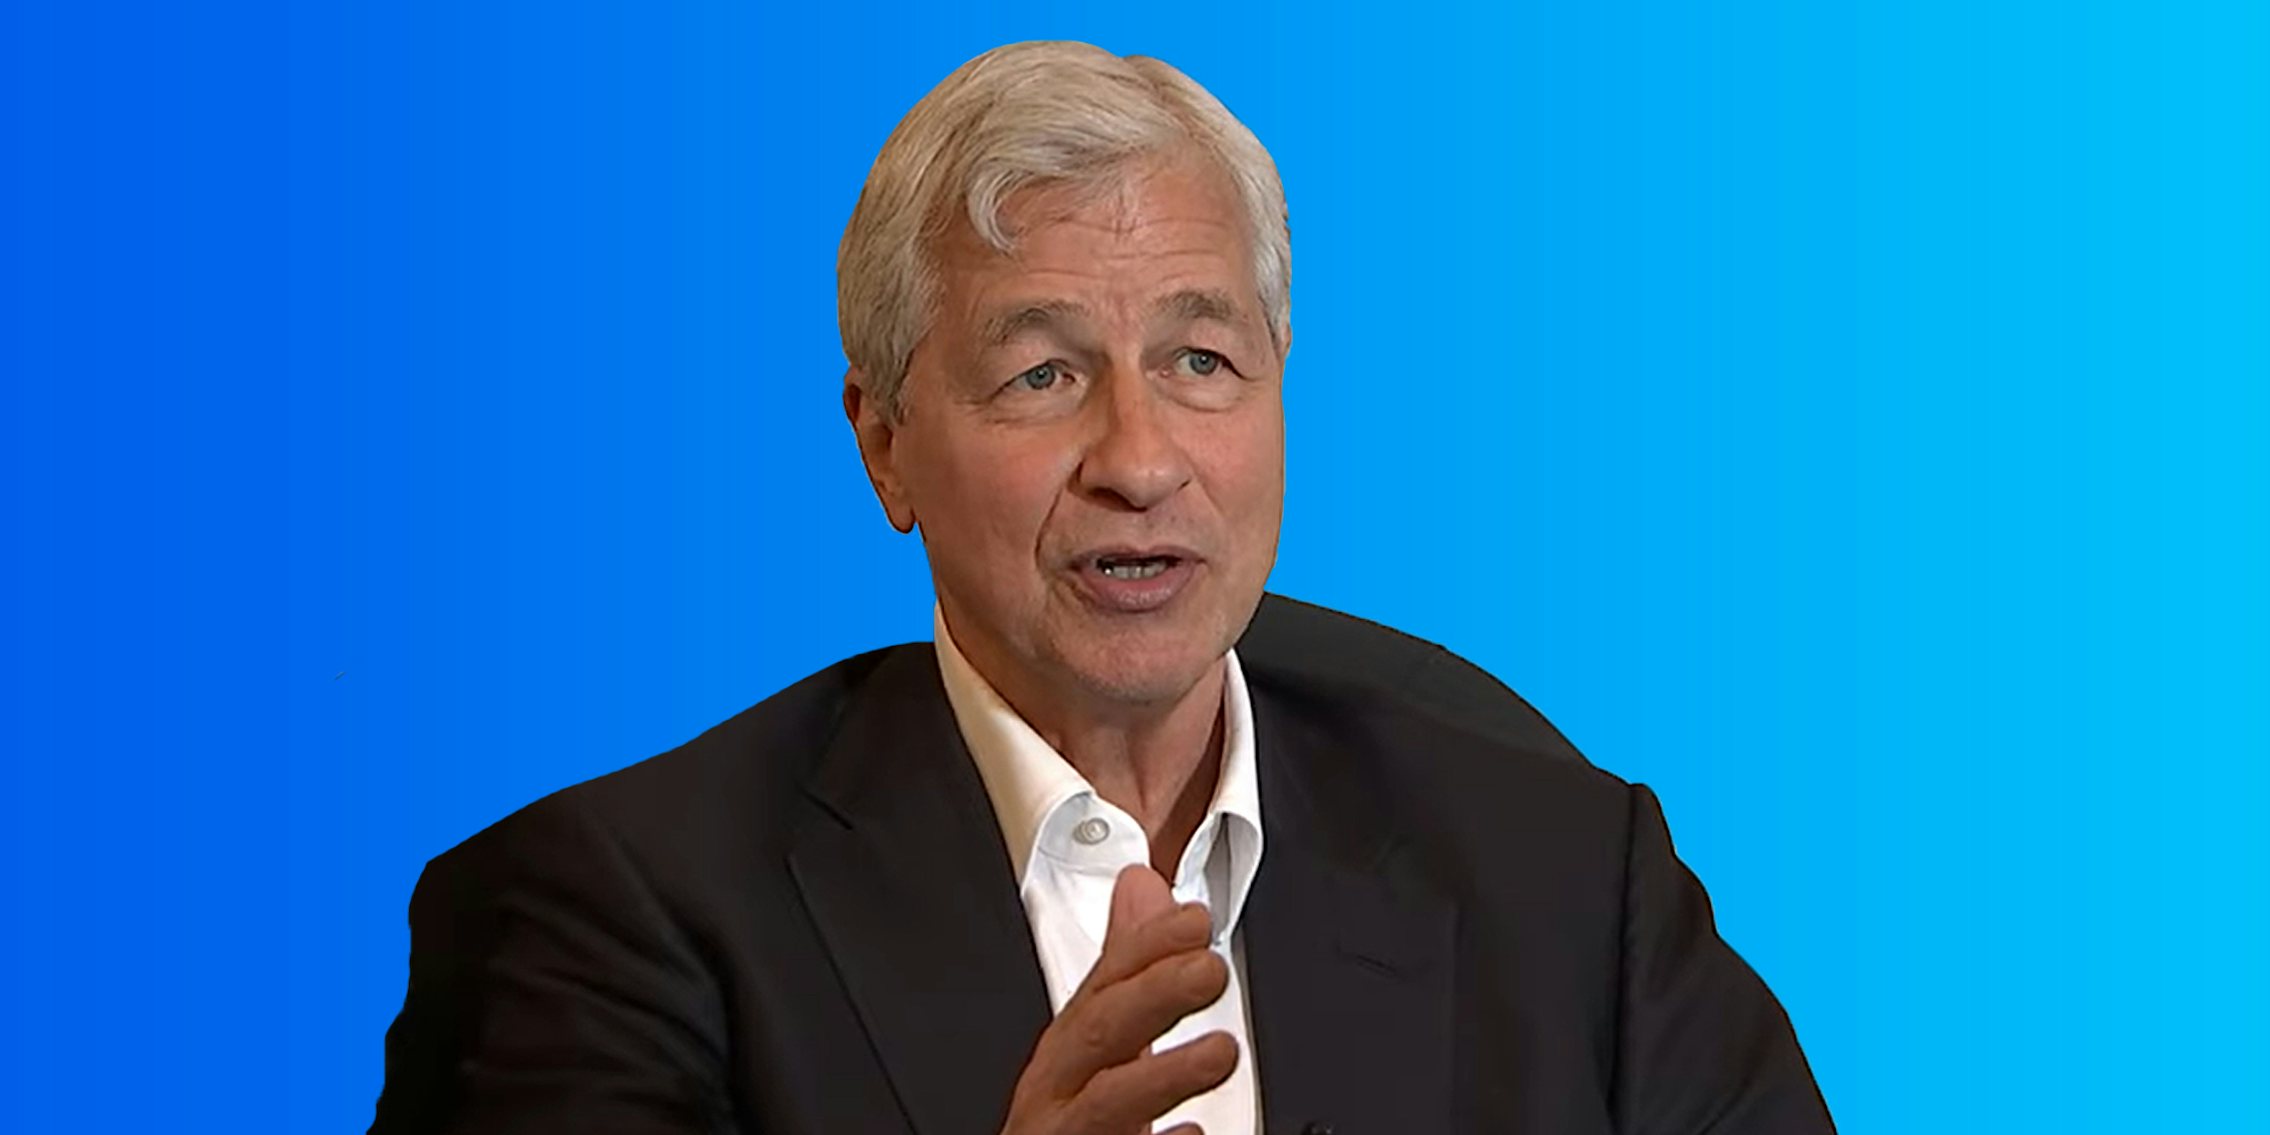 Jamie Dimon CEO speaking hand out on blue background